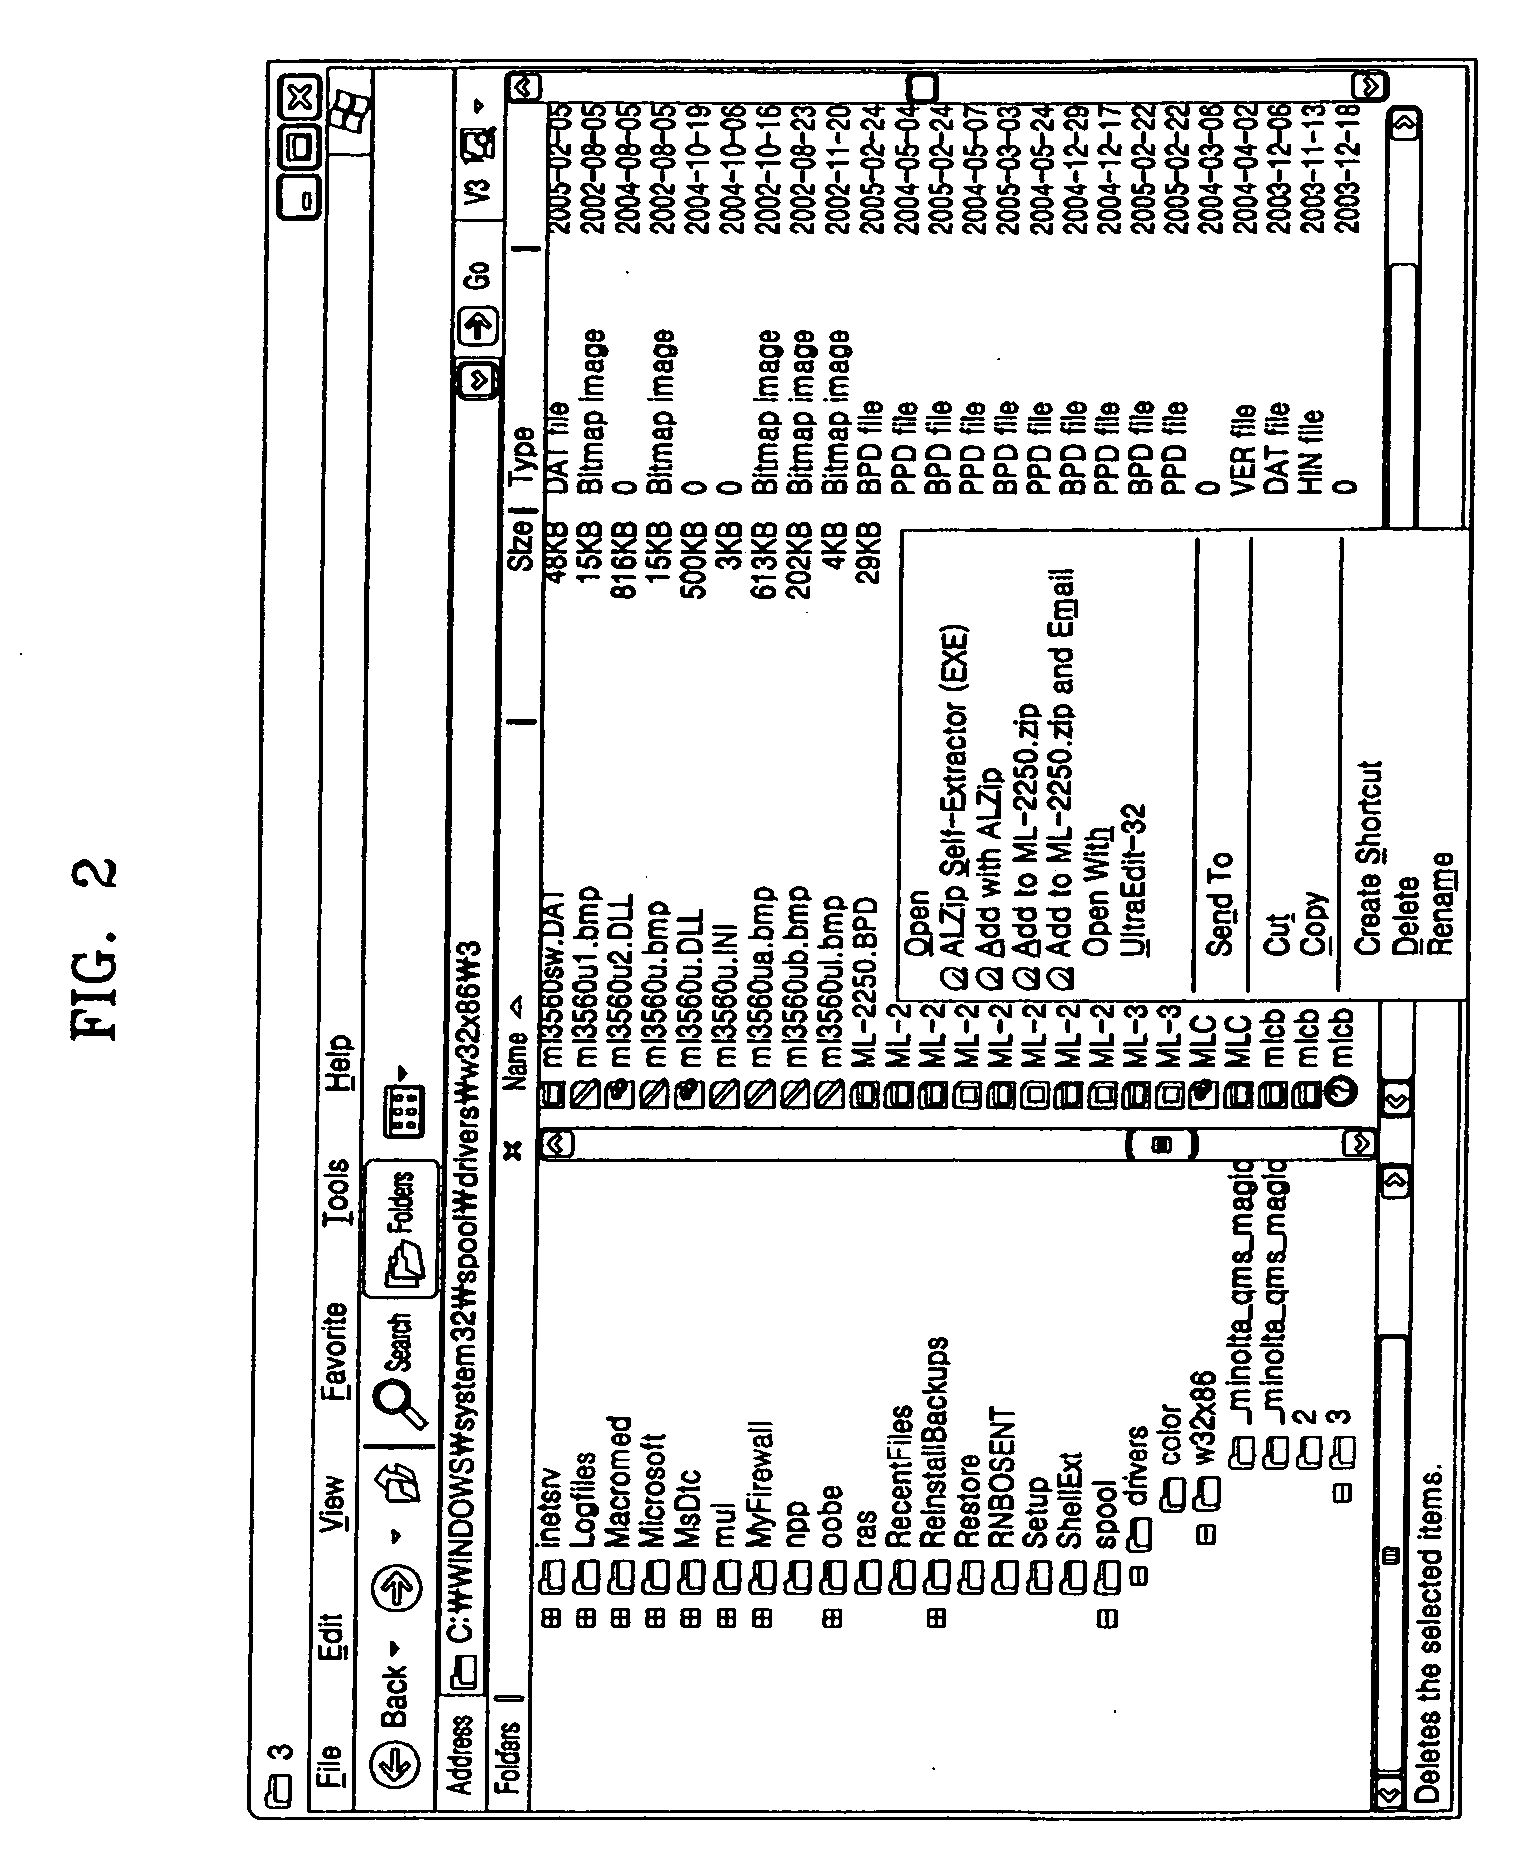 File management method and apparatus to manage driver files necessary to drive a device connected to terminal